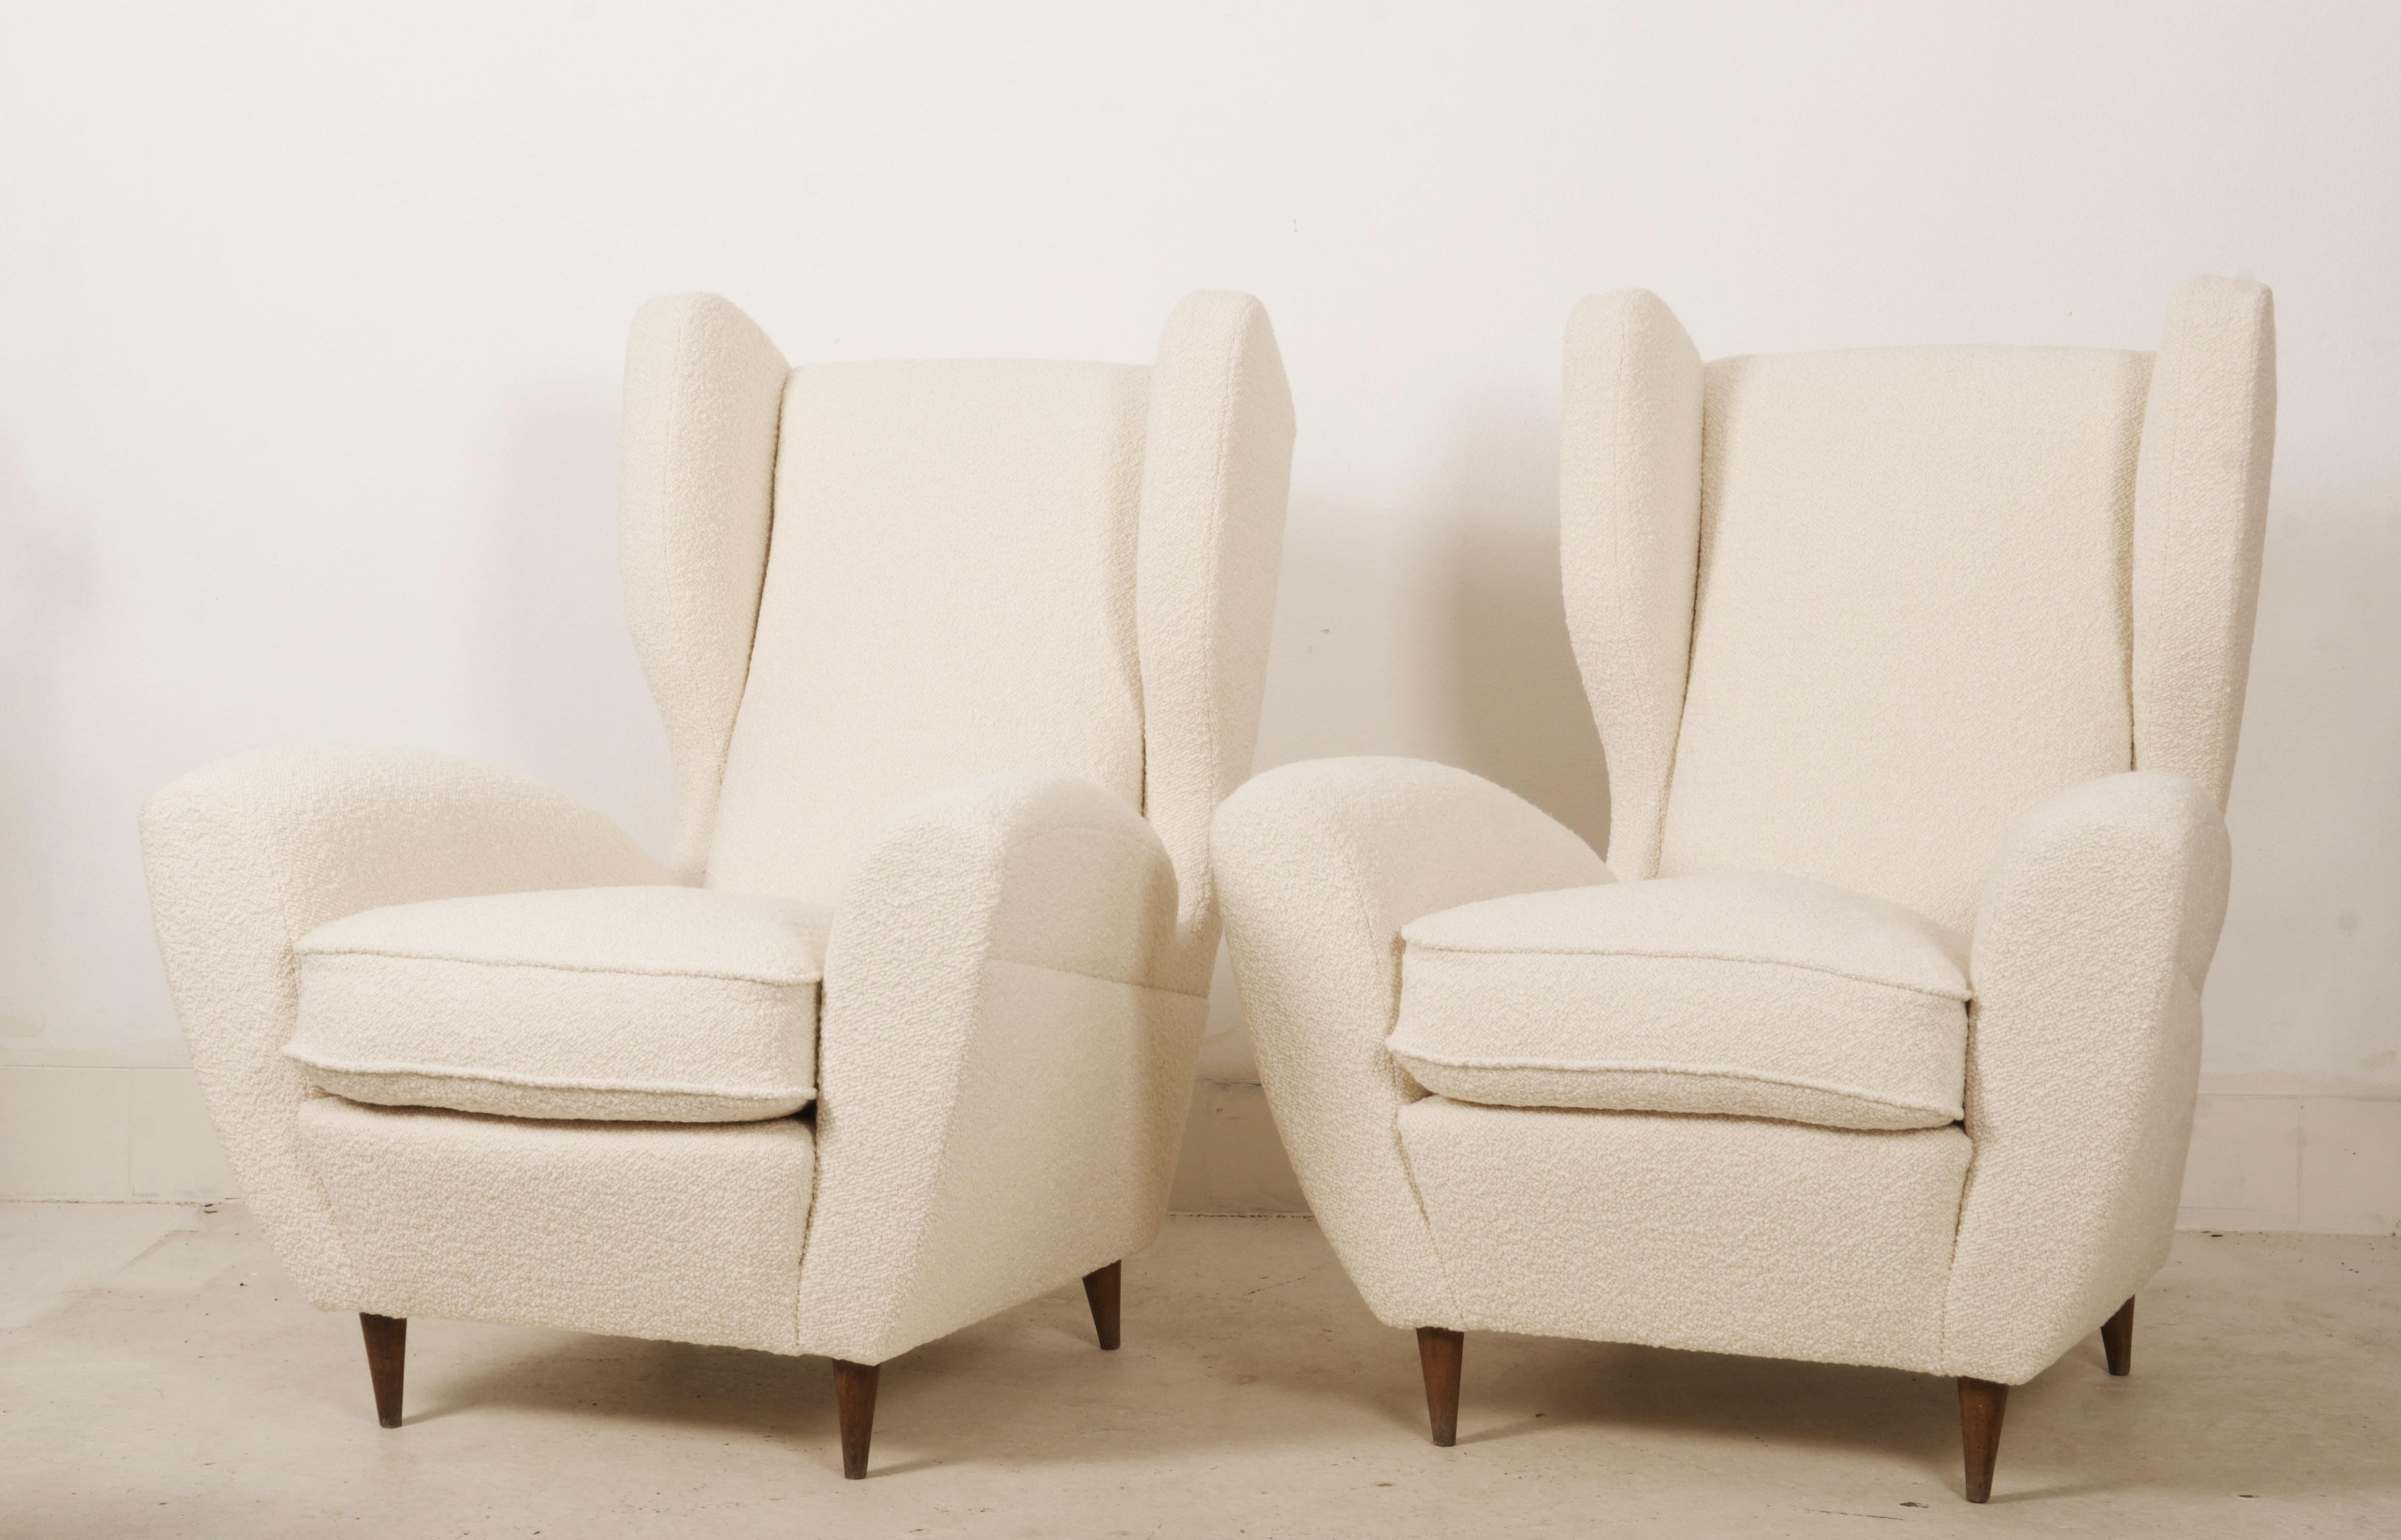 Pair of lounge or wingback chairs in cream DEDAR bouclé by Melchiorre Bega from the 1950. Chairs ware fully restored with traditional methods and the seat cushion filled with goose feathers.
Price for a pair. (I can also sell just one)